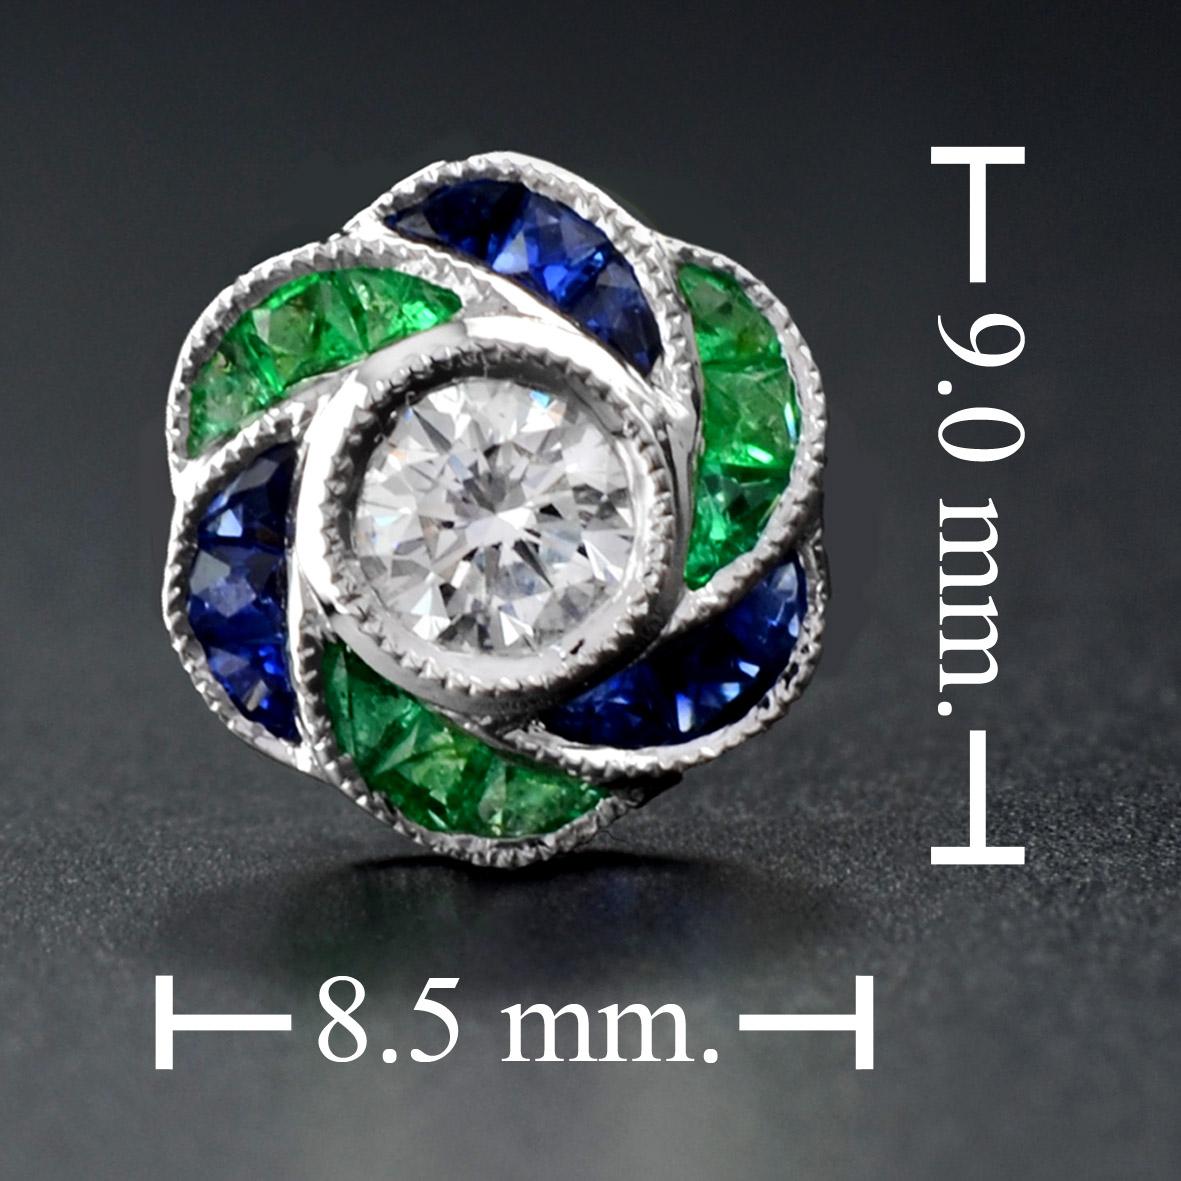 Round Cut Diamond with Emerald and Sapphire Floral Stud Earrings in 18K Gold For Sale 1